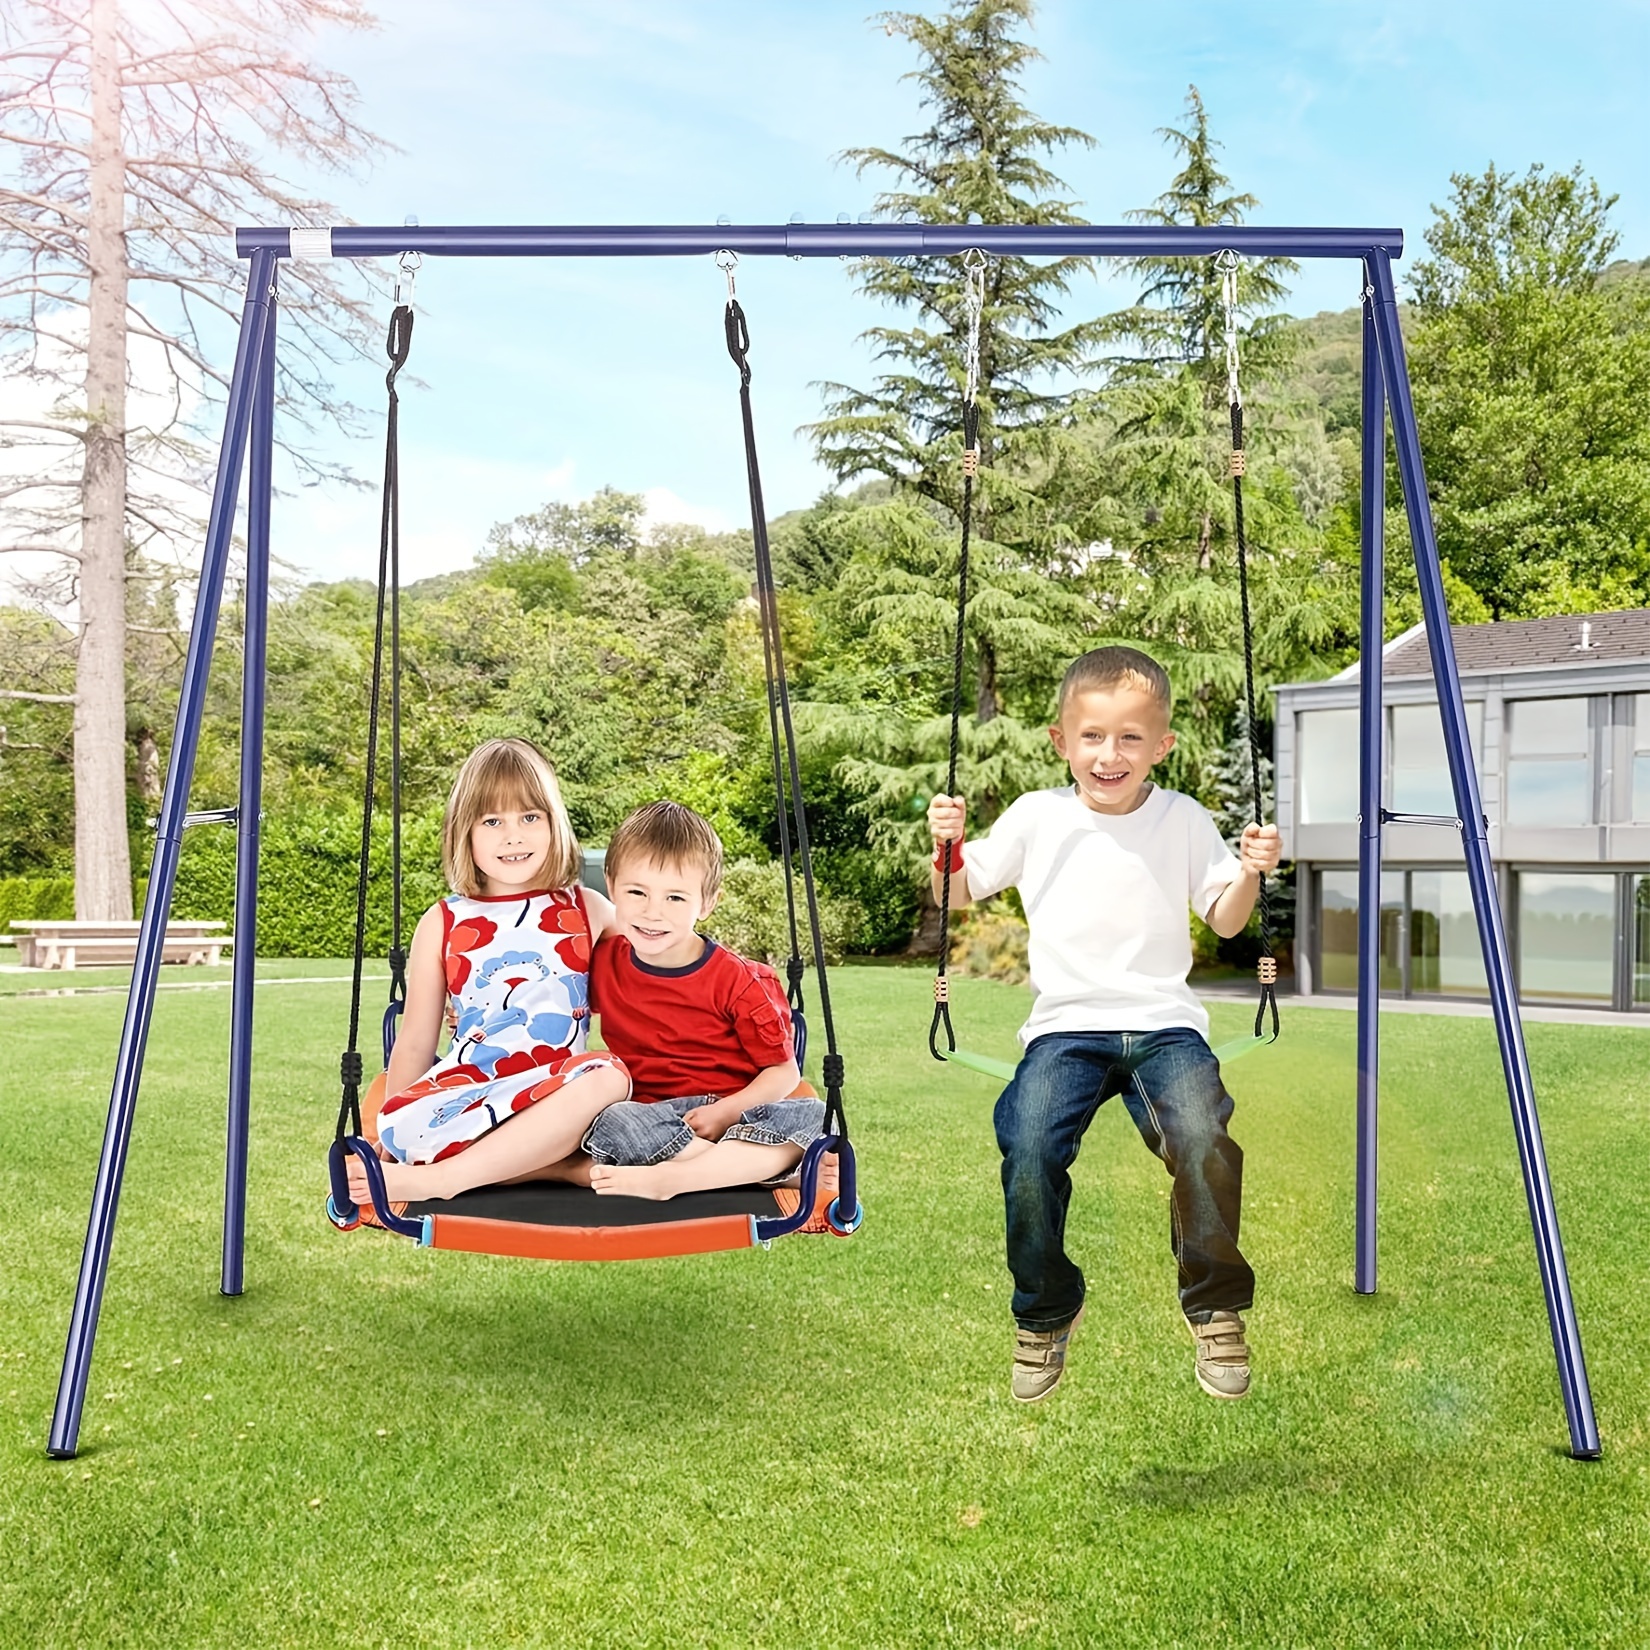 

Backyard Swing Set For Kids, 440lbs Outdoor Playground Swing Set With Heavy Duty Metal A-frame Swing Stand, 2 Adjustable Swing Seats For Backyard, Park And Playground